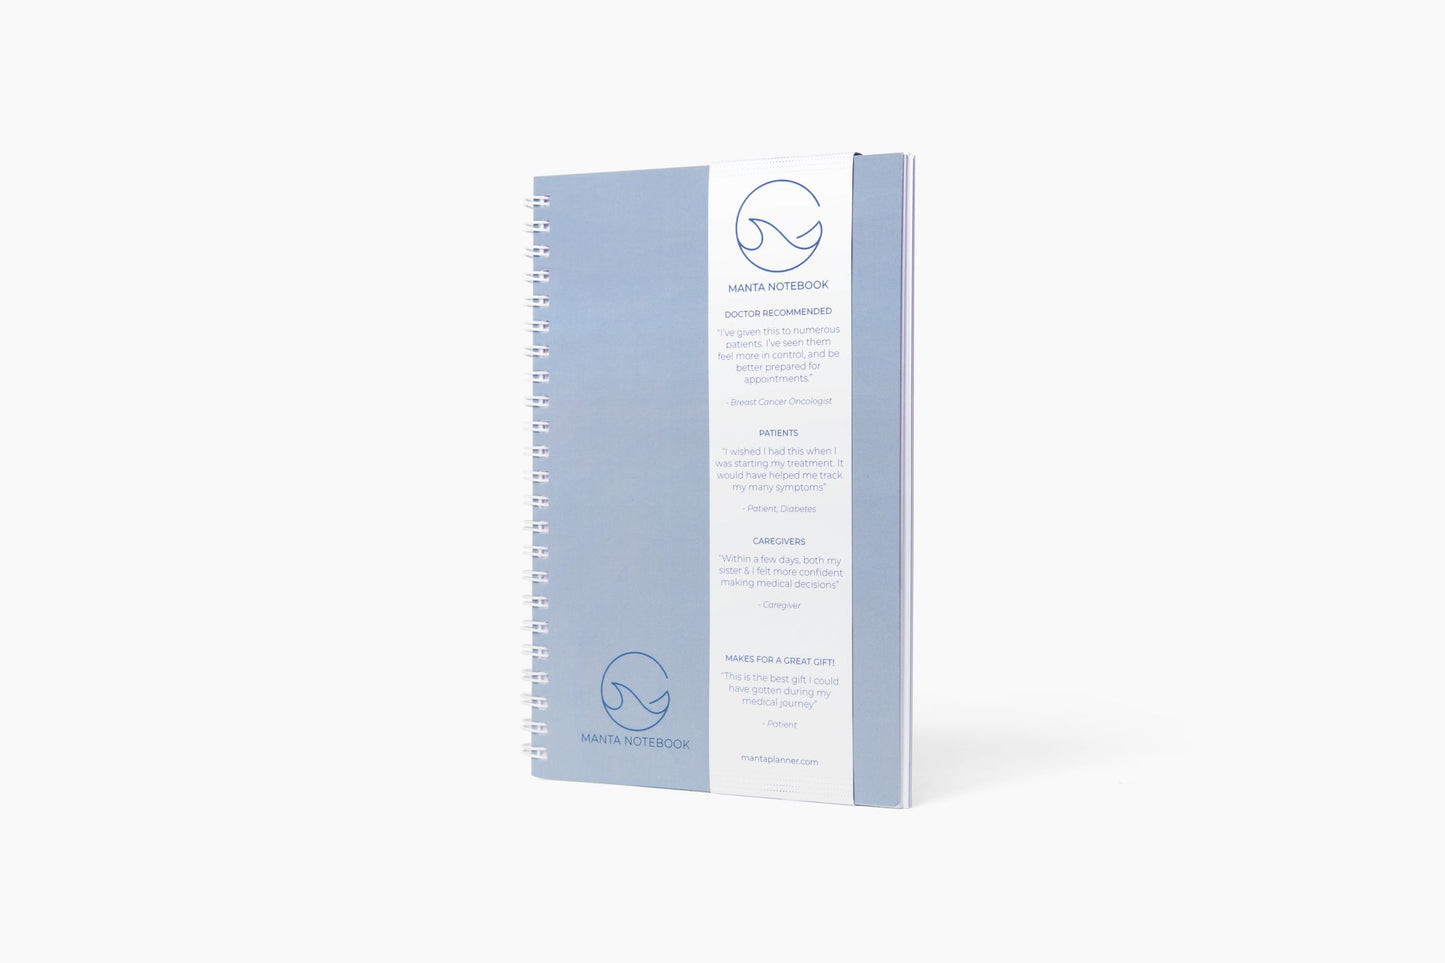 Medical Notebook - Spiral Bound Journal for patients navigating complex medical conditions. Helps you prepare for appointments, take notes at the doctors, and stay organized. Recommended by doctors.